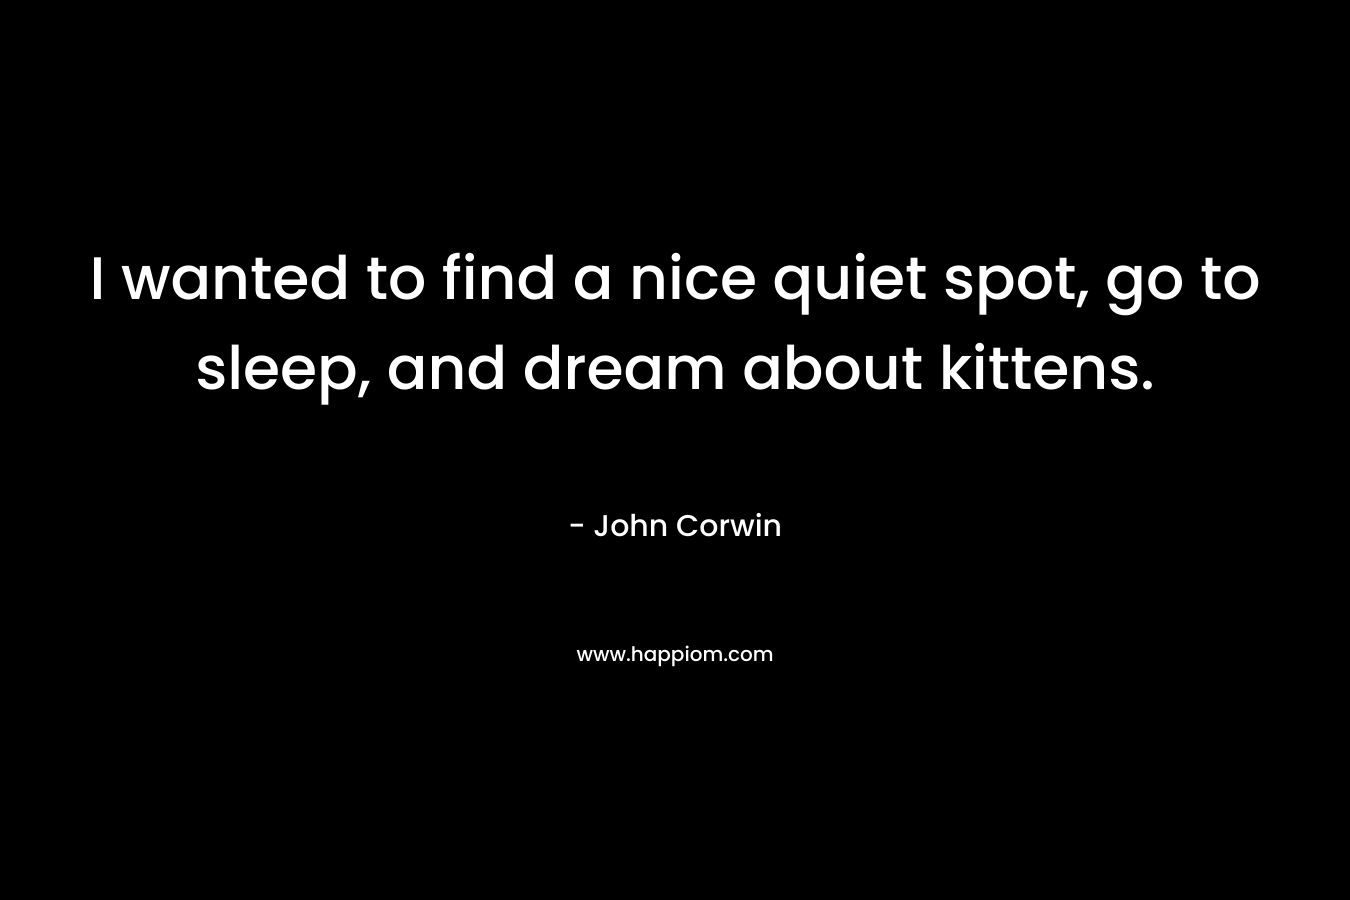 I wanted to find a nice quiet spot, go to sleep, and dream about kittens. – John Corwin